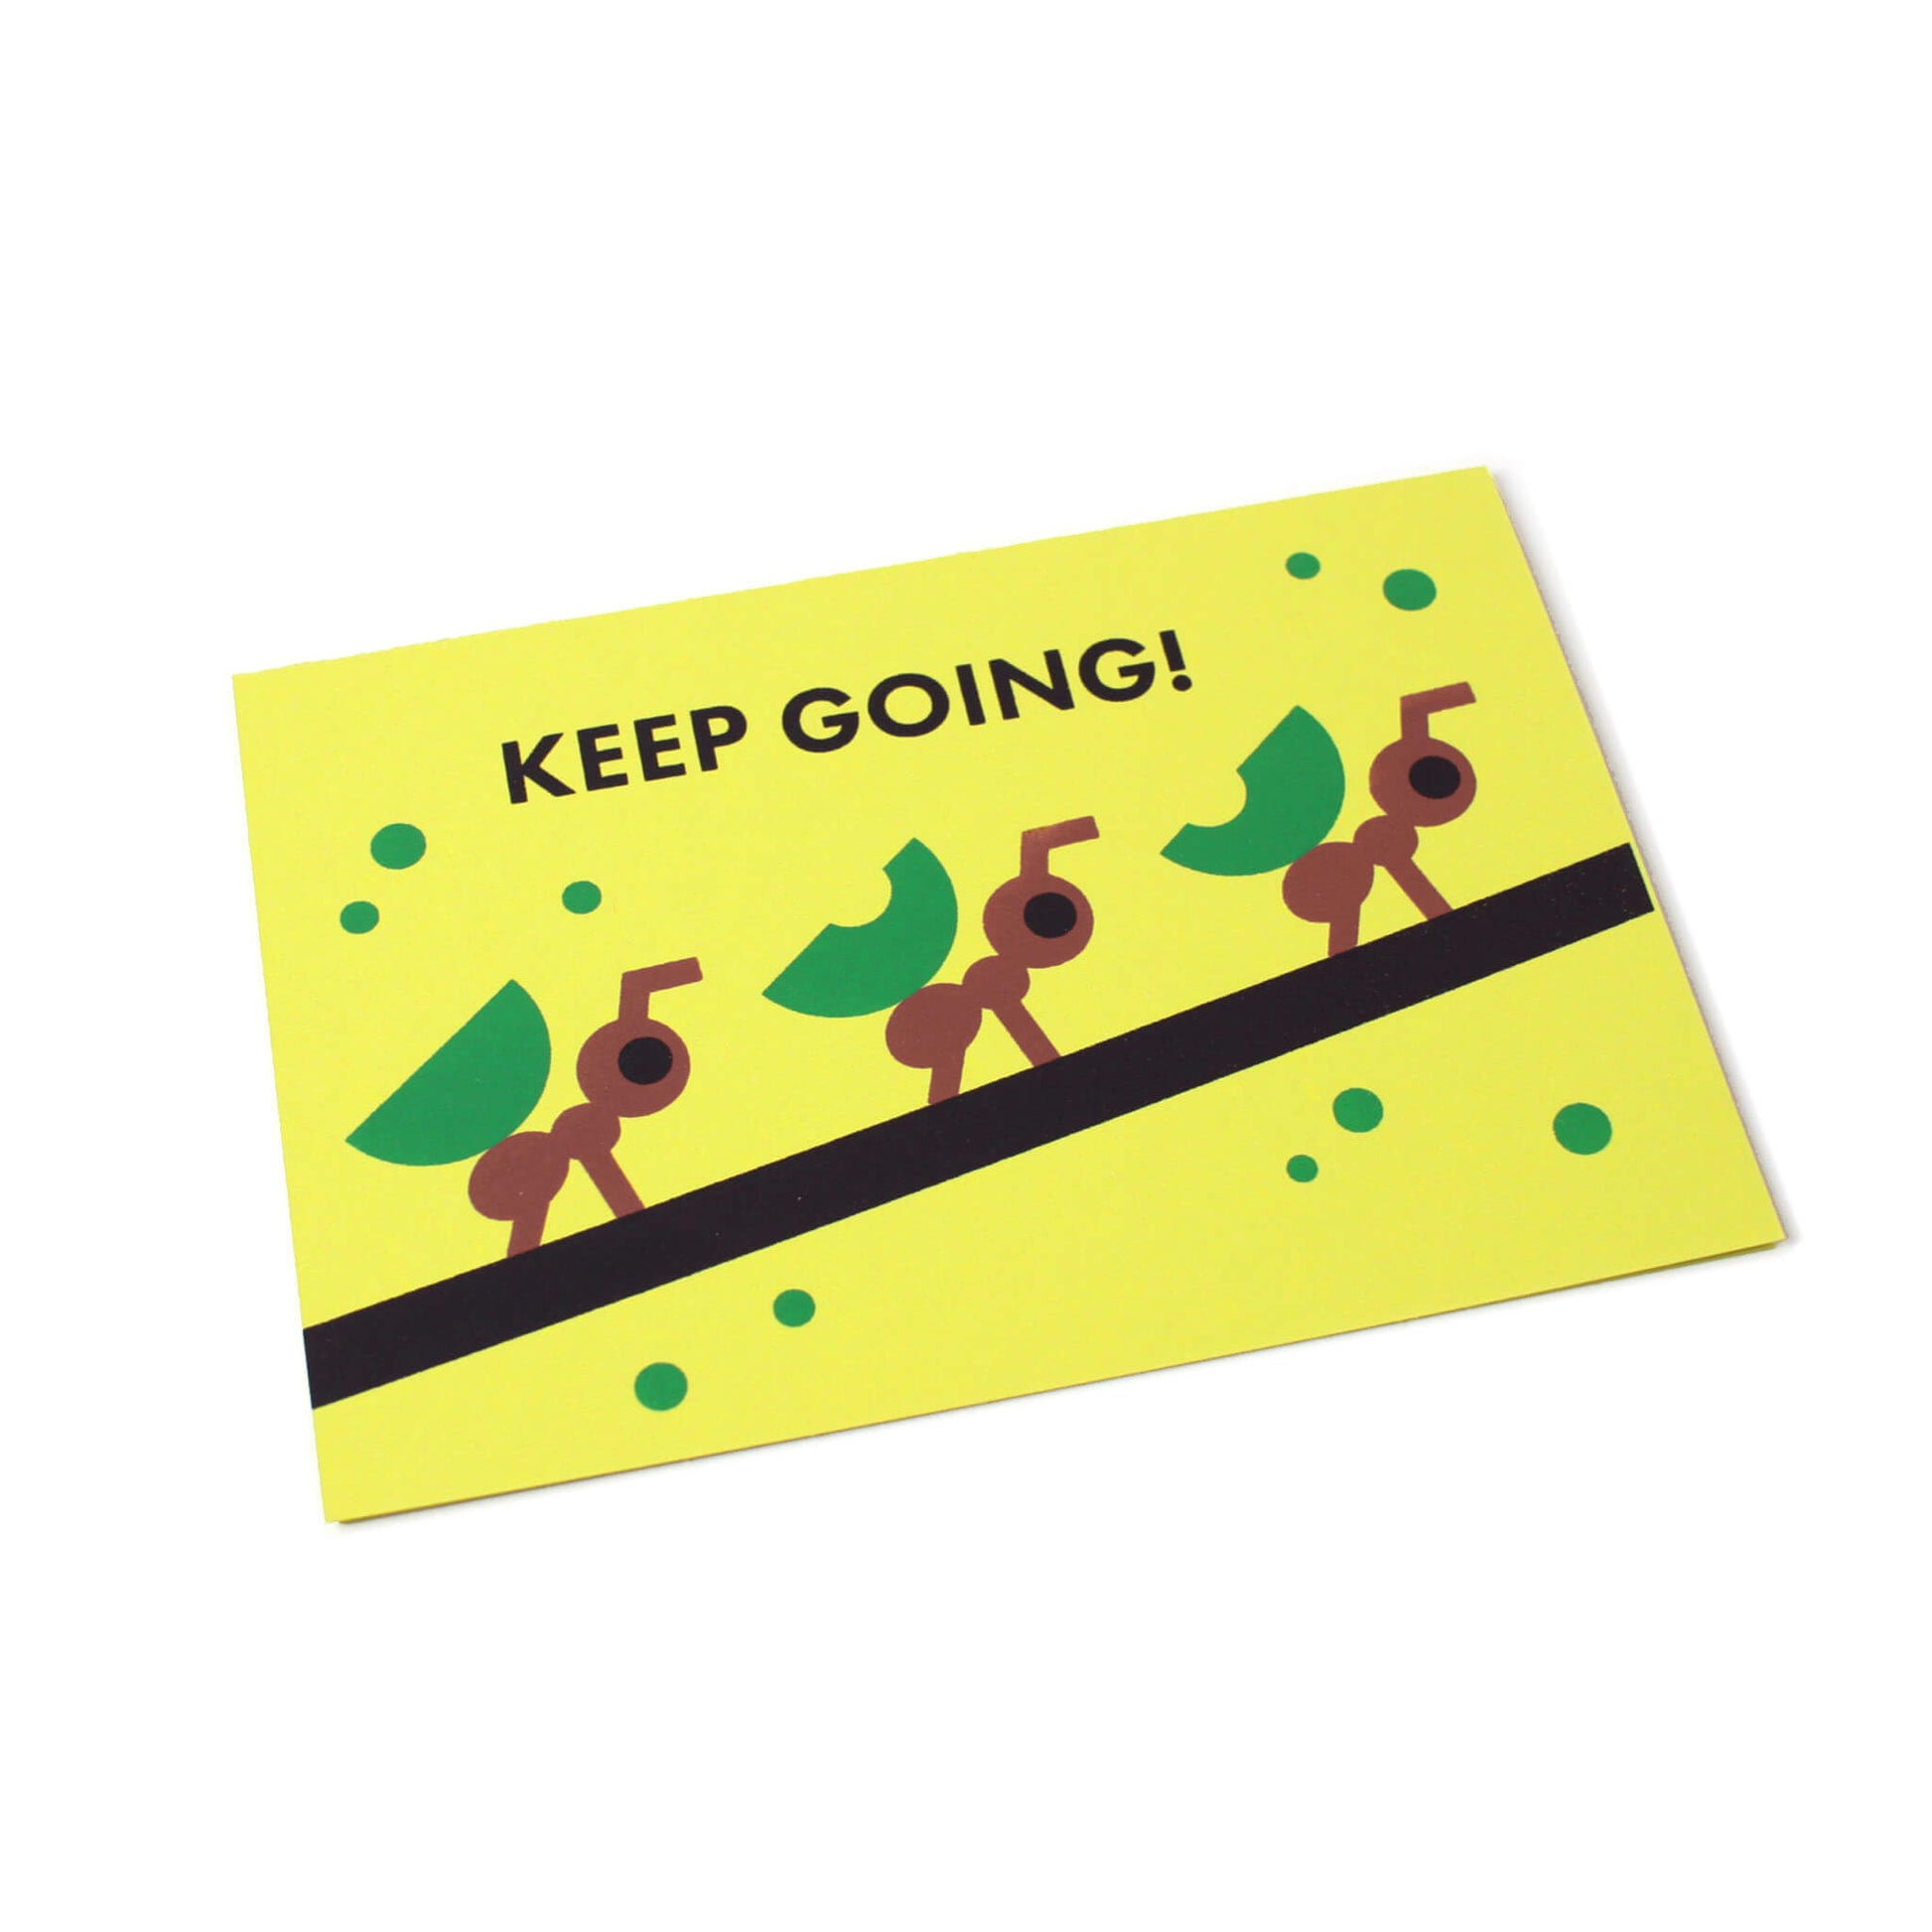 Green greeting card with an illustration of ants carrying leaves in a row on a branch, with the text Keep going!